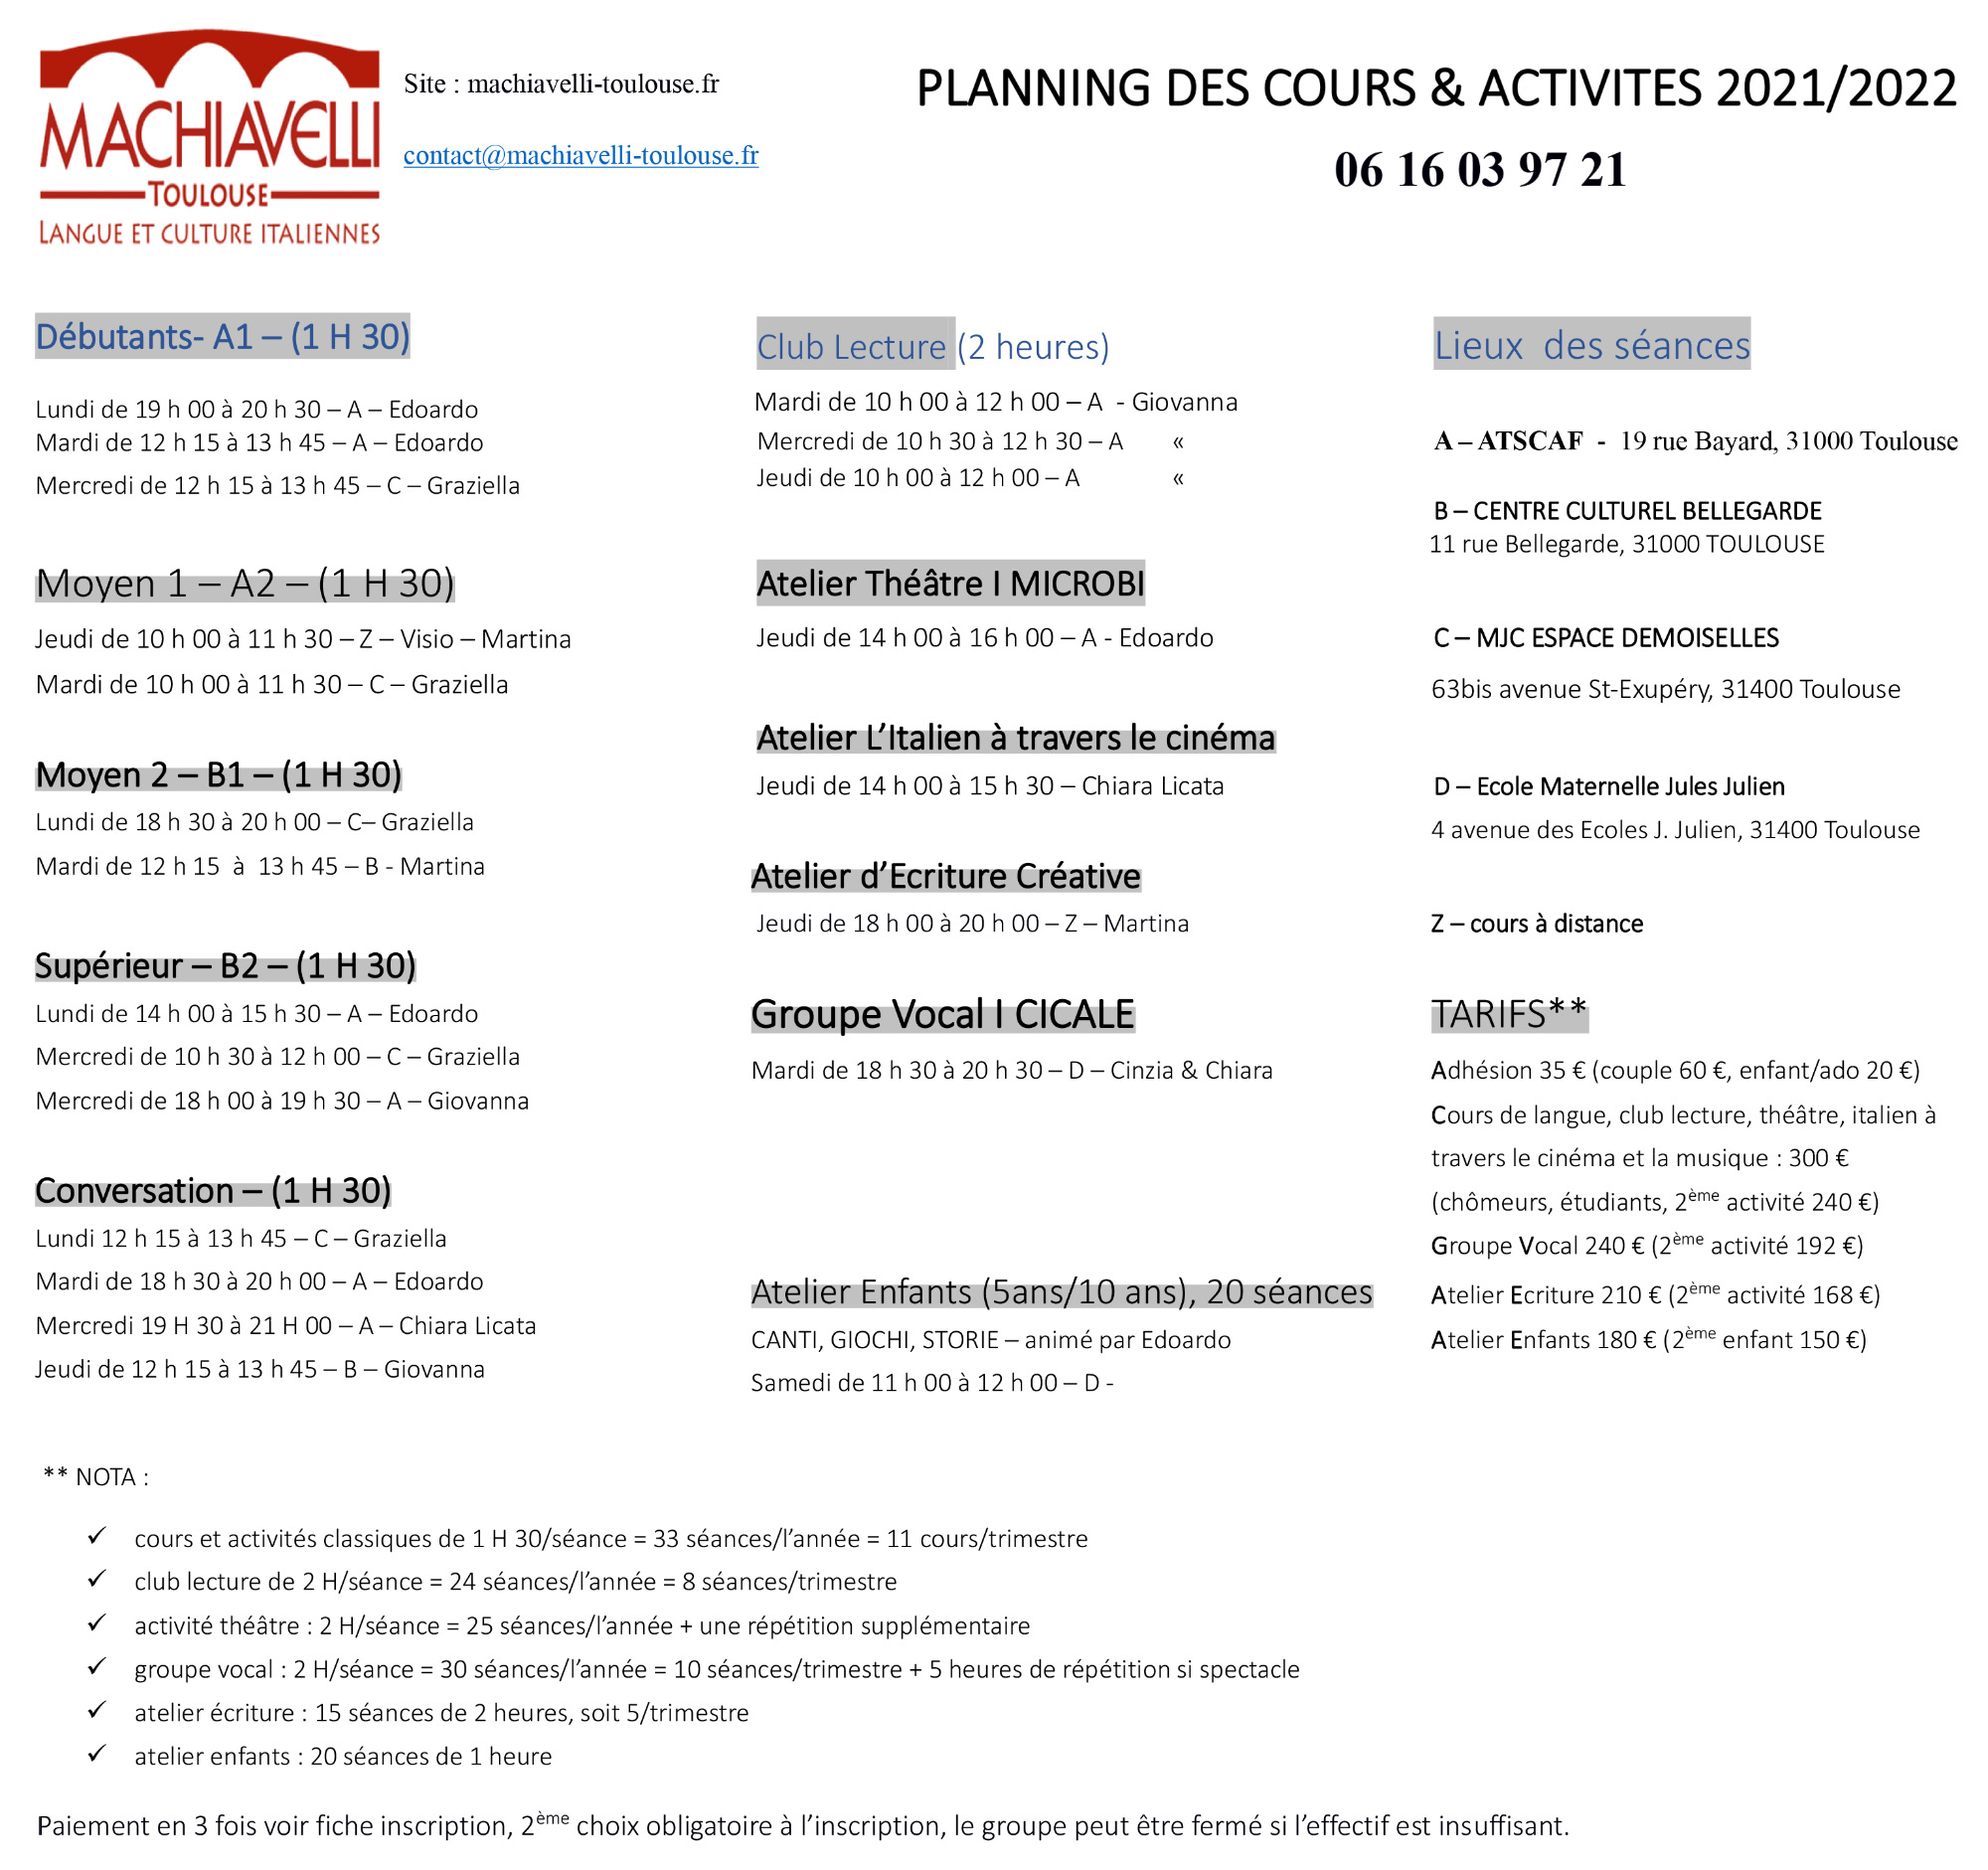 Planning cours Machiavelli Toulouse 2021 2022